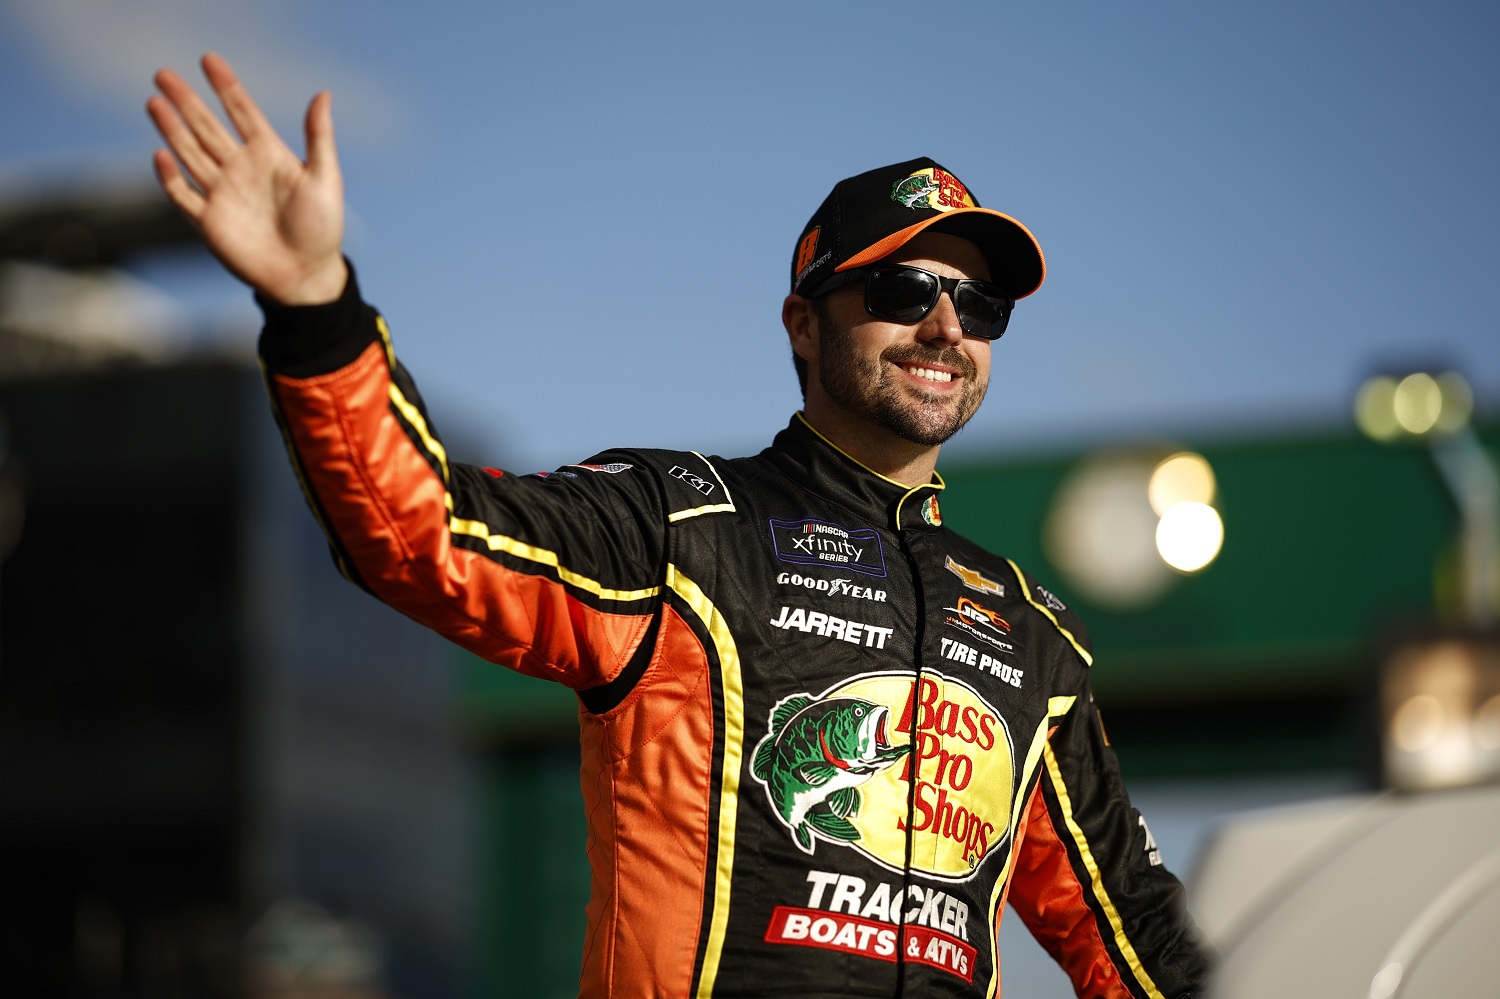 Josh Berry waves to fans during the parade lap before the NASCAR Xfinity Series race at Daytona International Speedway on Feb. 18, 2023.